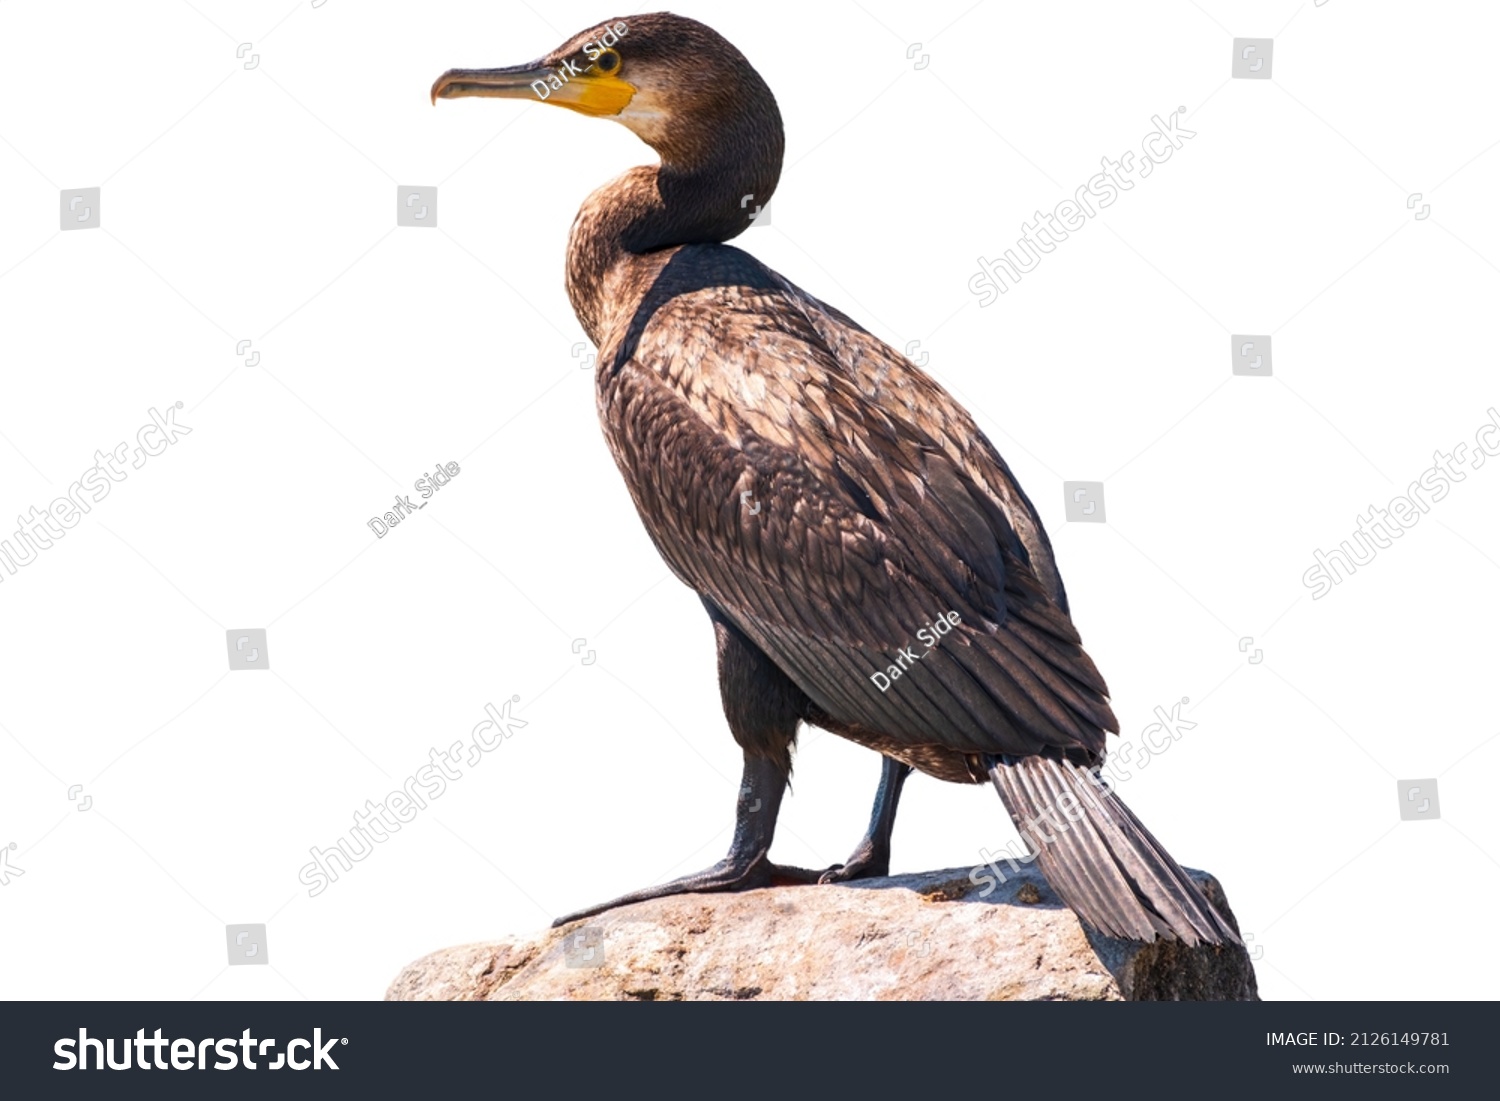 Great cormorant, Phalacrocorax carbo, standing in water on the sea shore, isolated on white background. The great cormorant, Phalacrocorax carbo, known as the great black cormorant, or the black shag. #2126149781